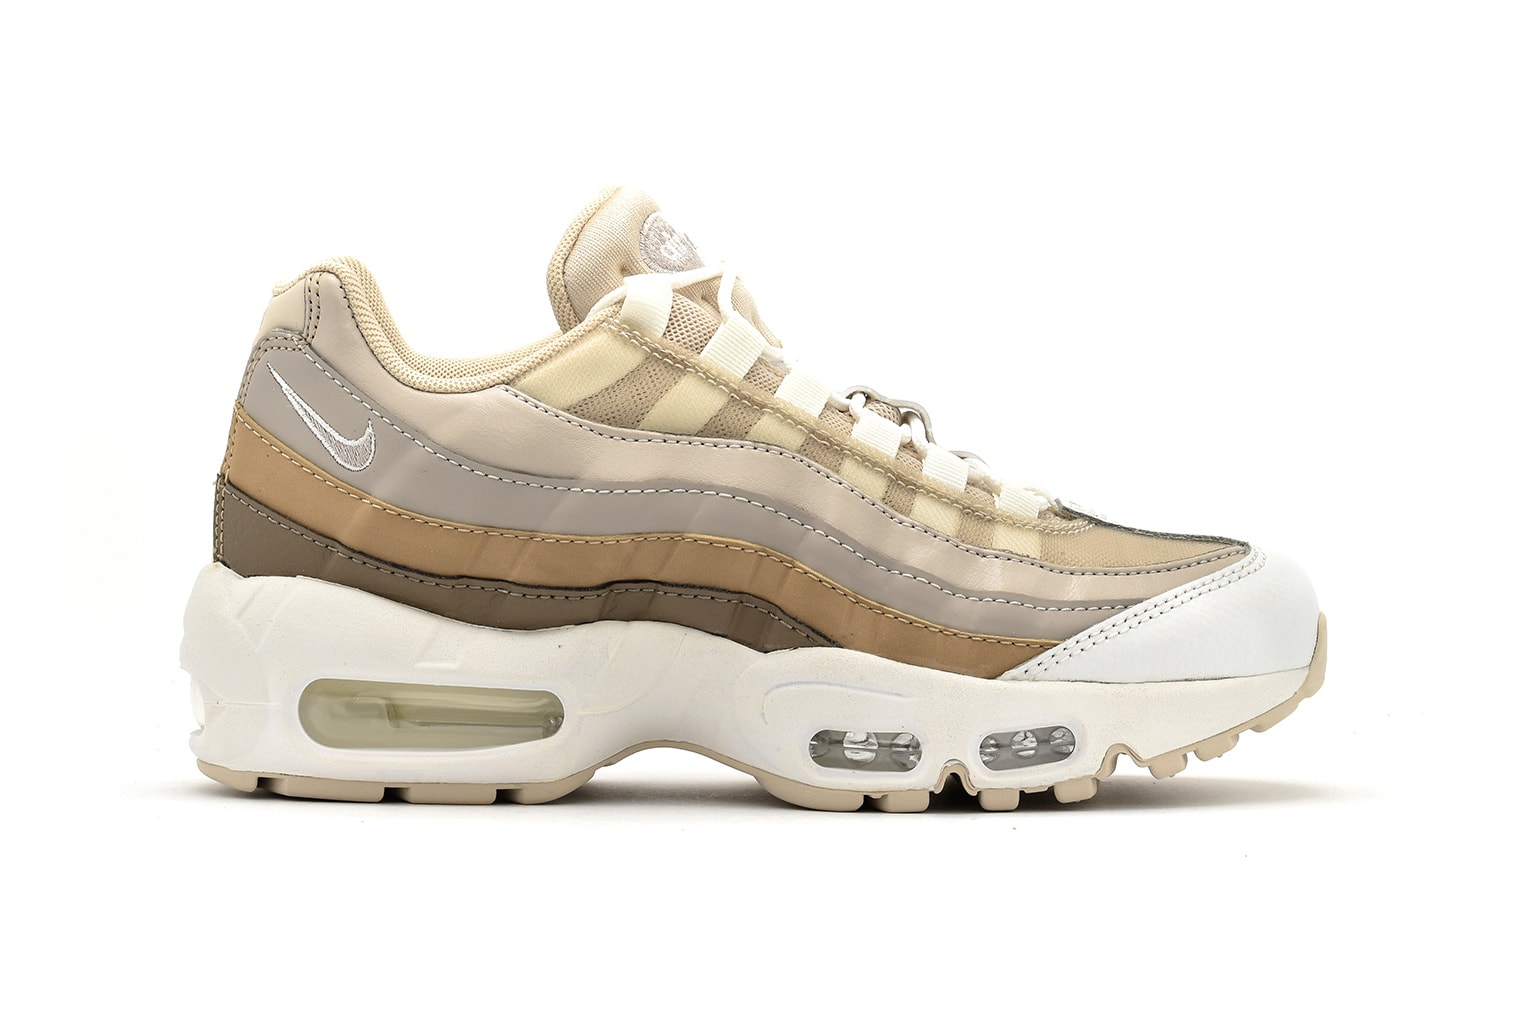 Nike Air Max 95 Desert Sand Moon Particle Brown Gradient Beige Off White Tan Neutral Women's Sneakers Where to Buy XTREME